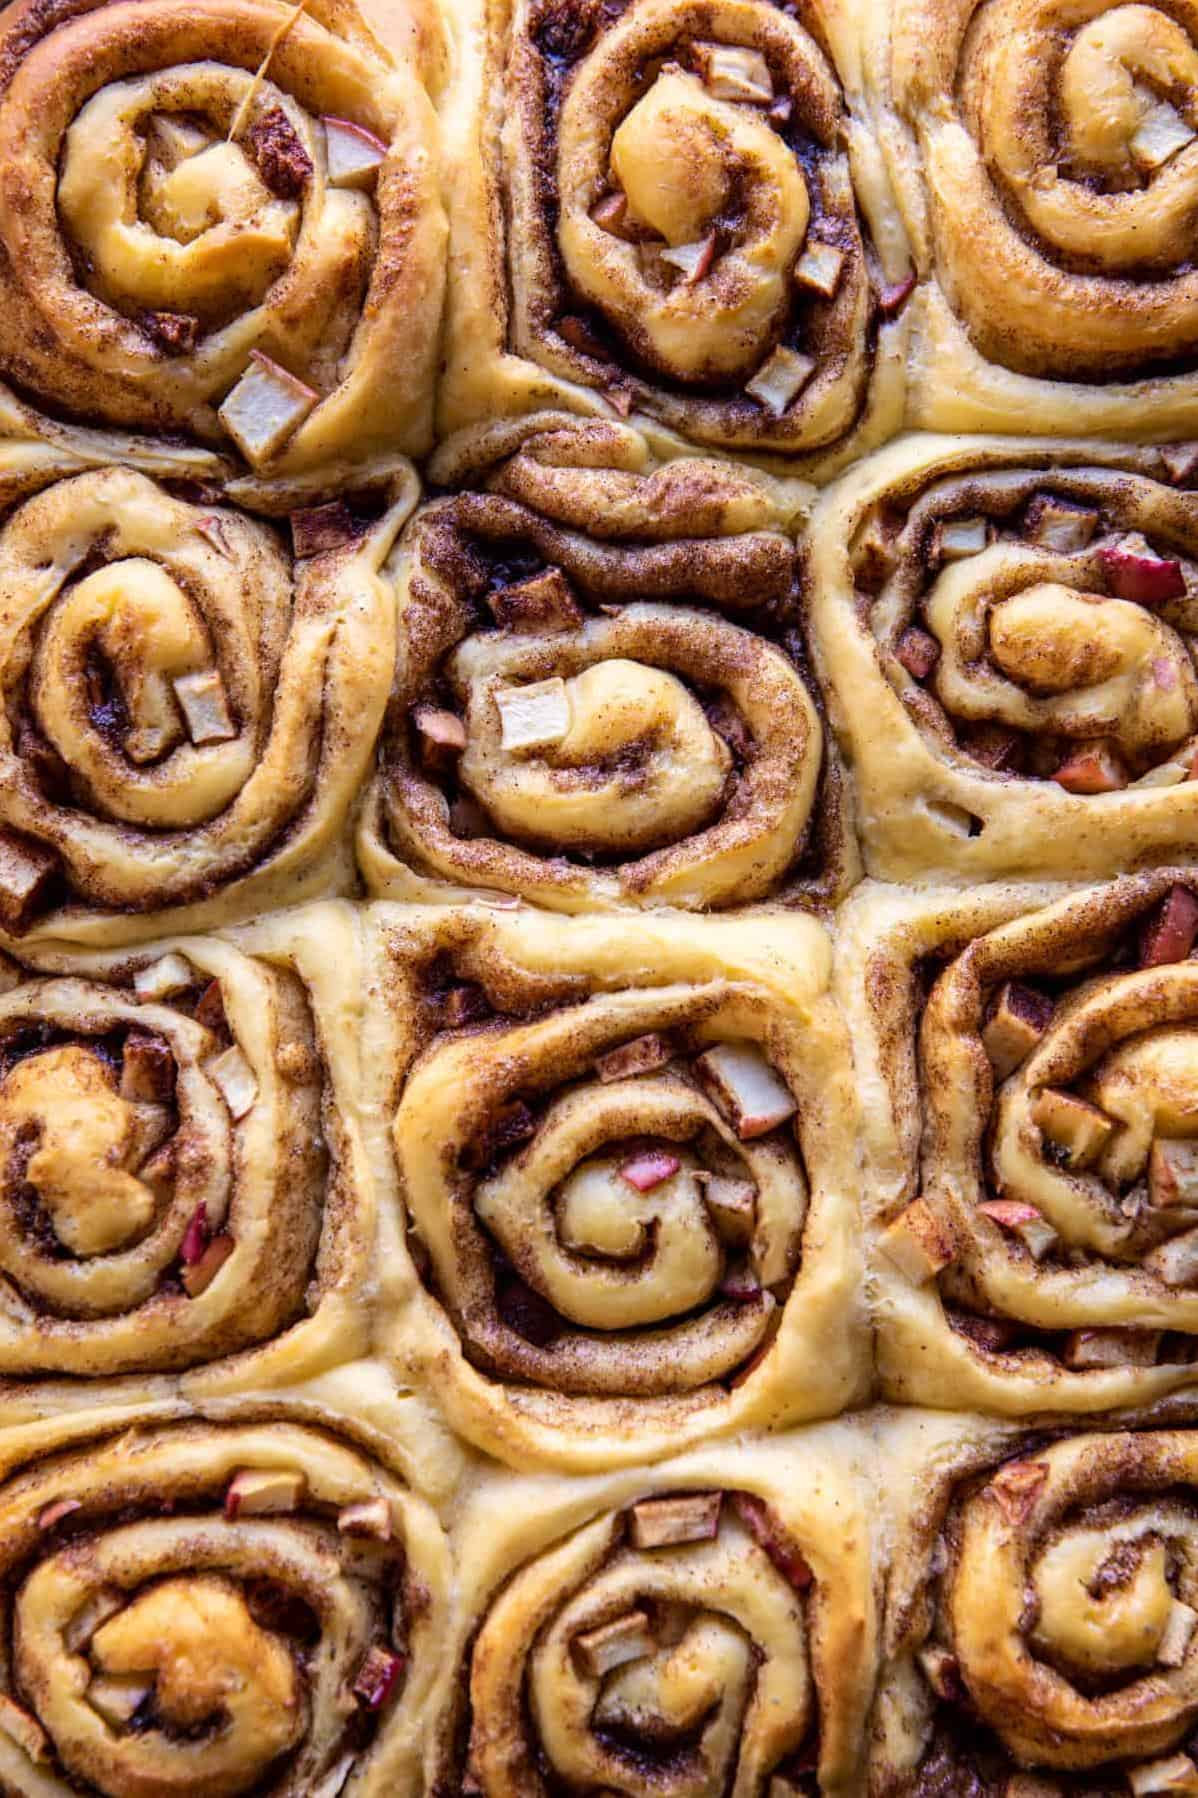  These cinnamon rolls are perfect for a cozy weekend brunch with friends and family.